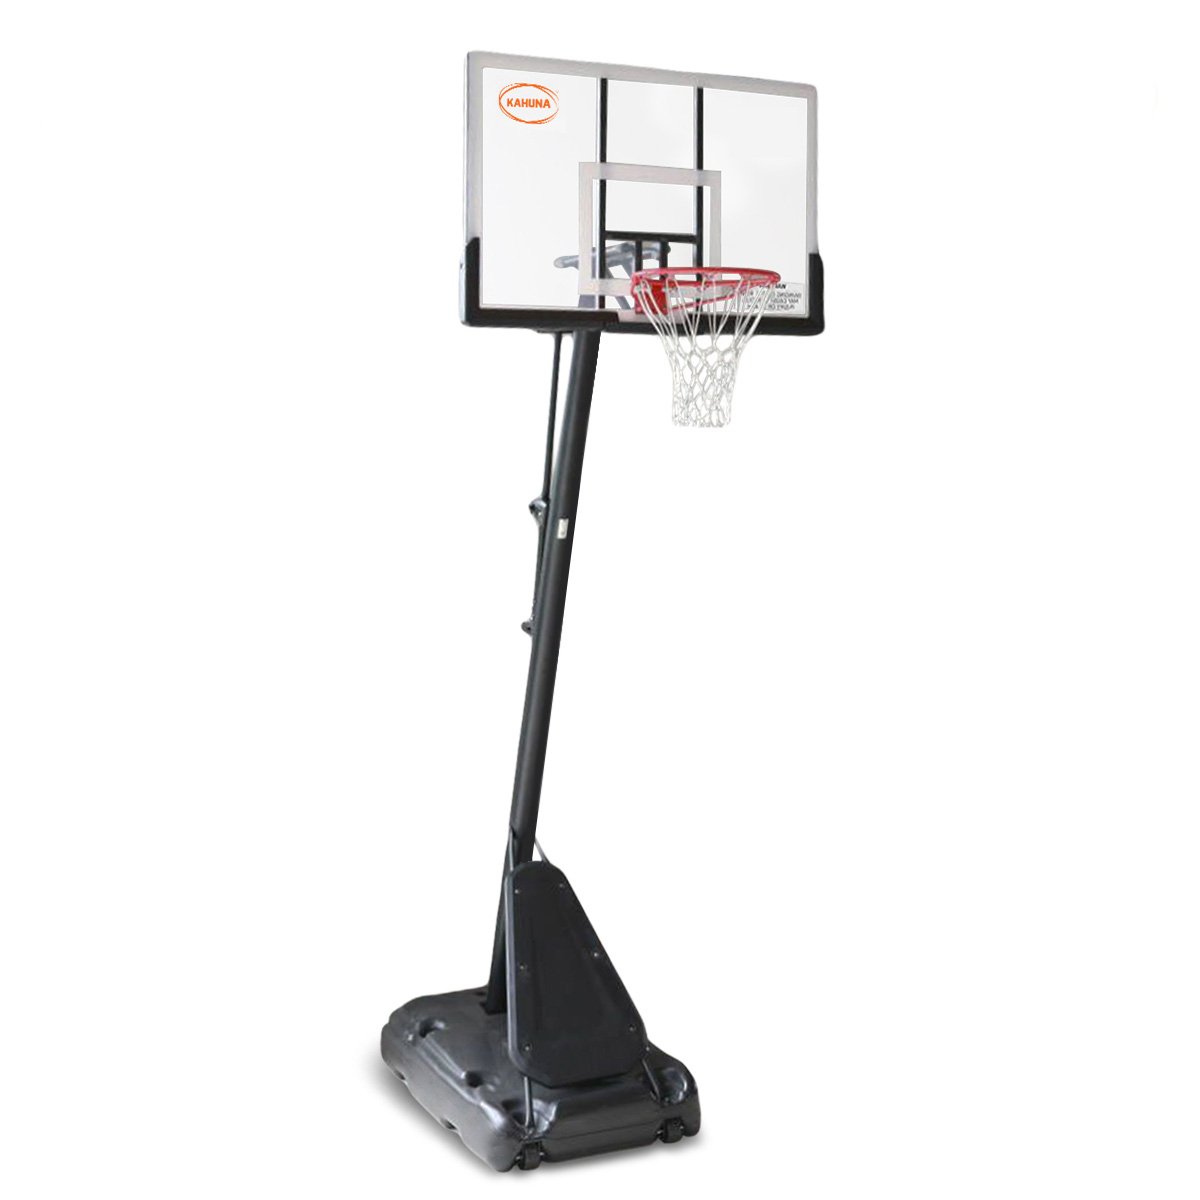 Kahuna Portable Basketball Hoop System 2.3 to 3.05m for Kids & Adults 1